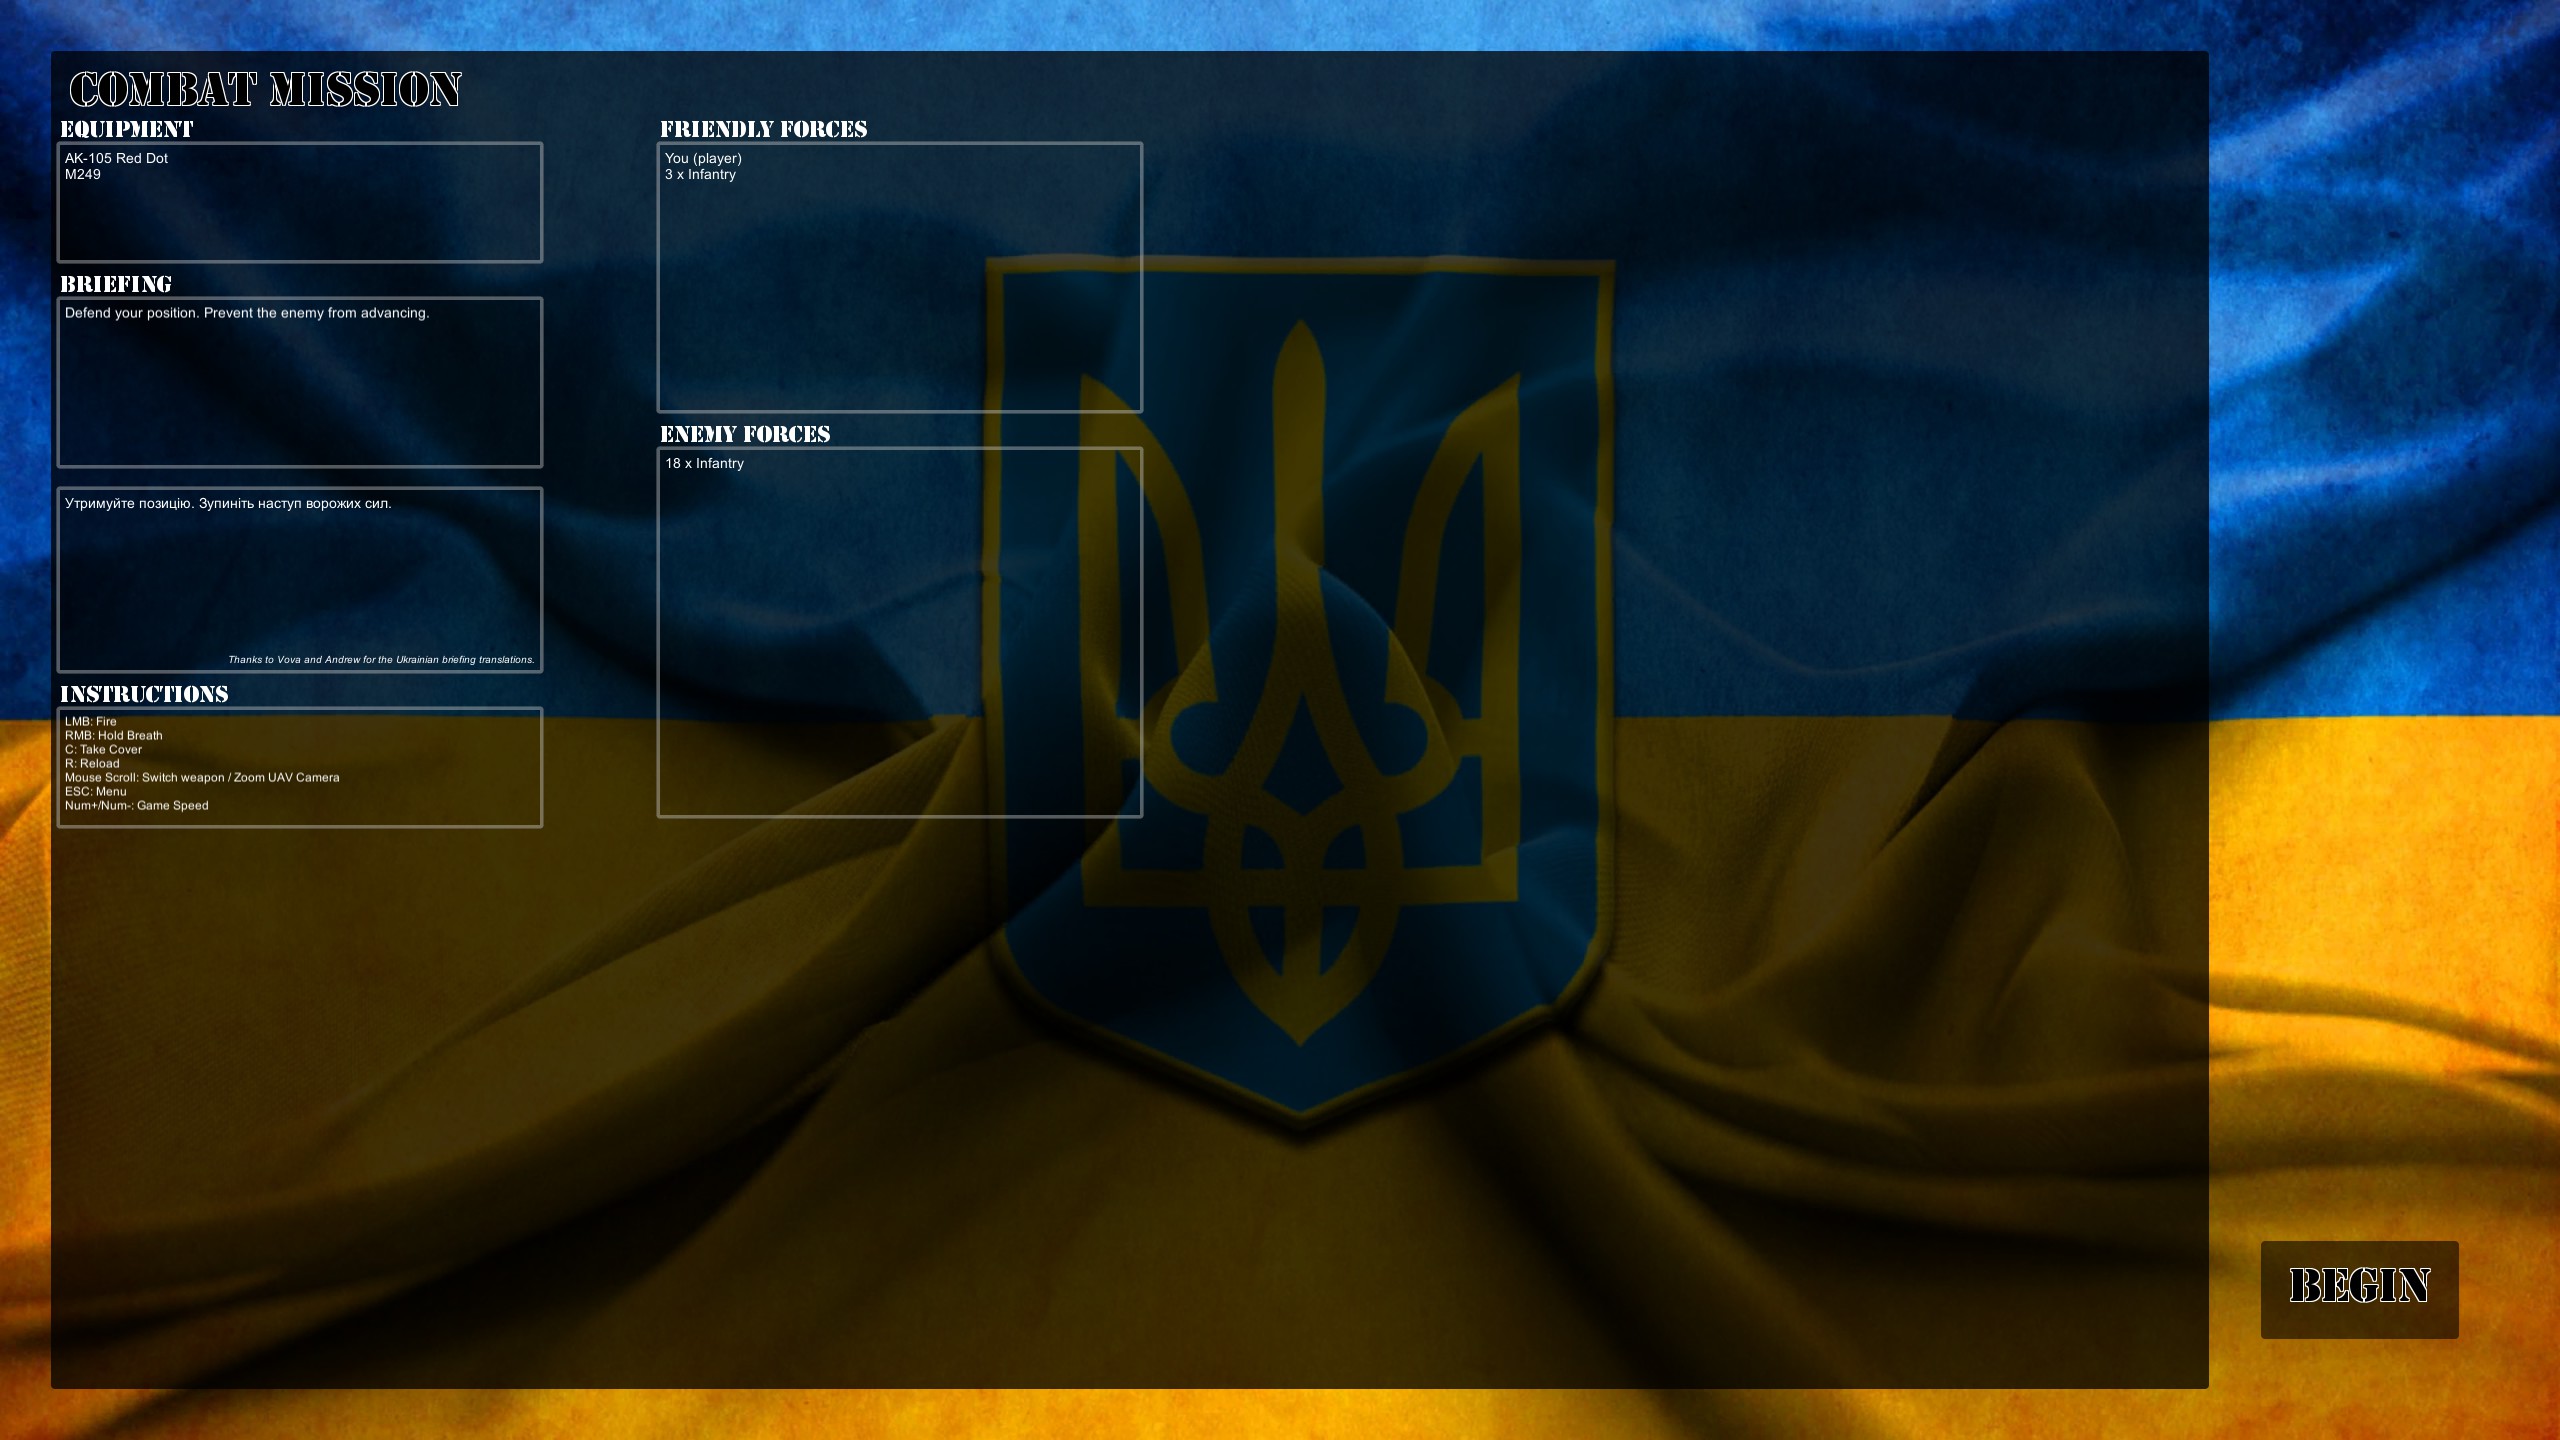 Slava Ukraini! - Achievements and Map Guide - What to Expect from 